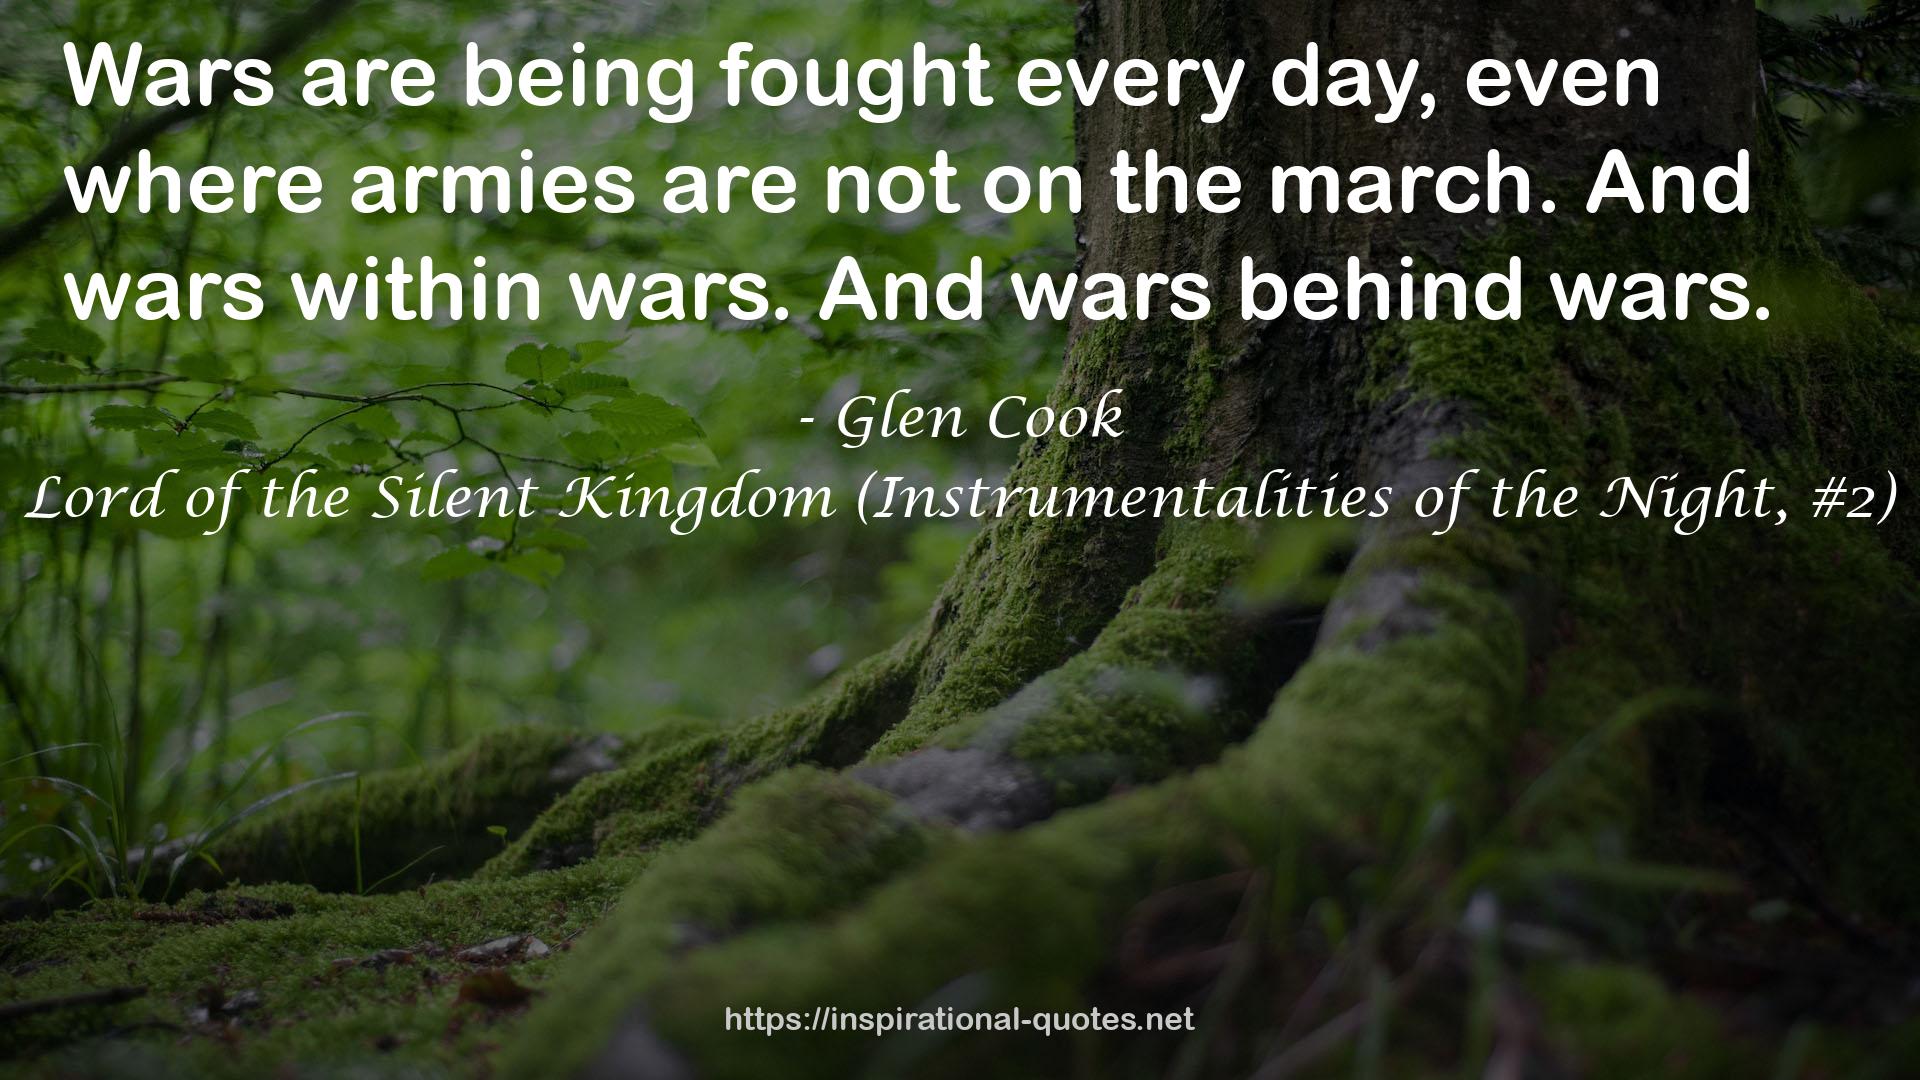 Lord of the Silent Kingdom (Instrumentalities of the Night, #2) QUOTES